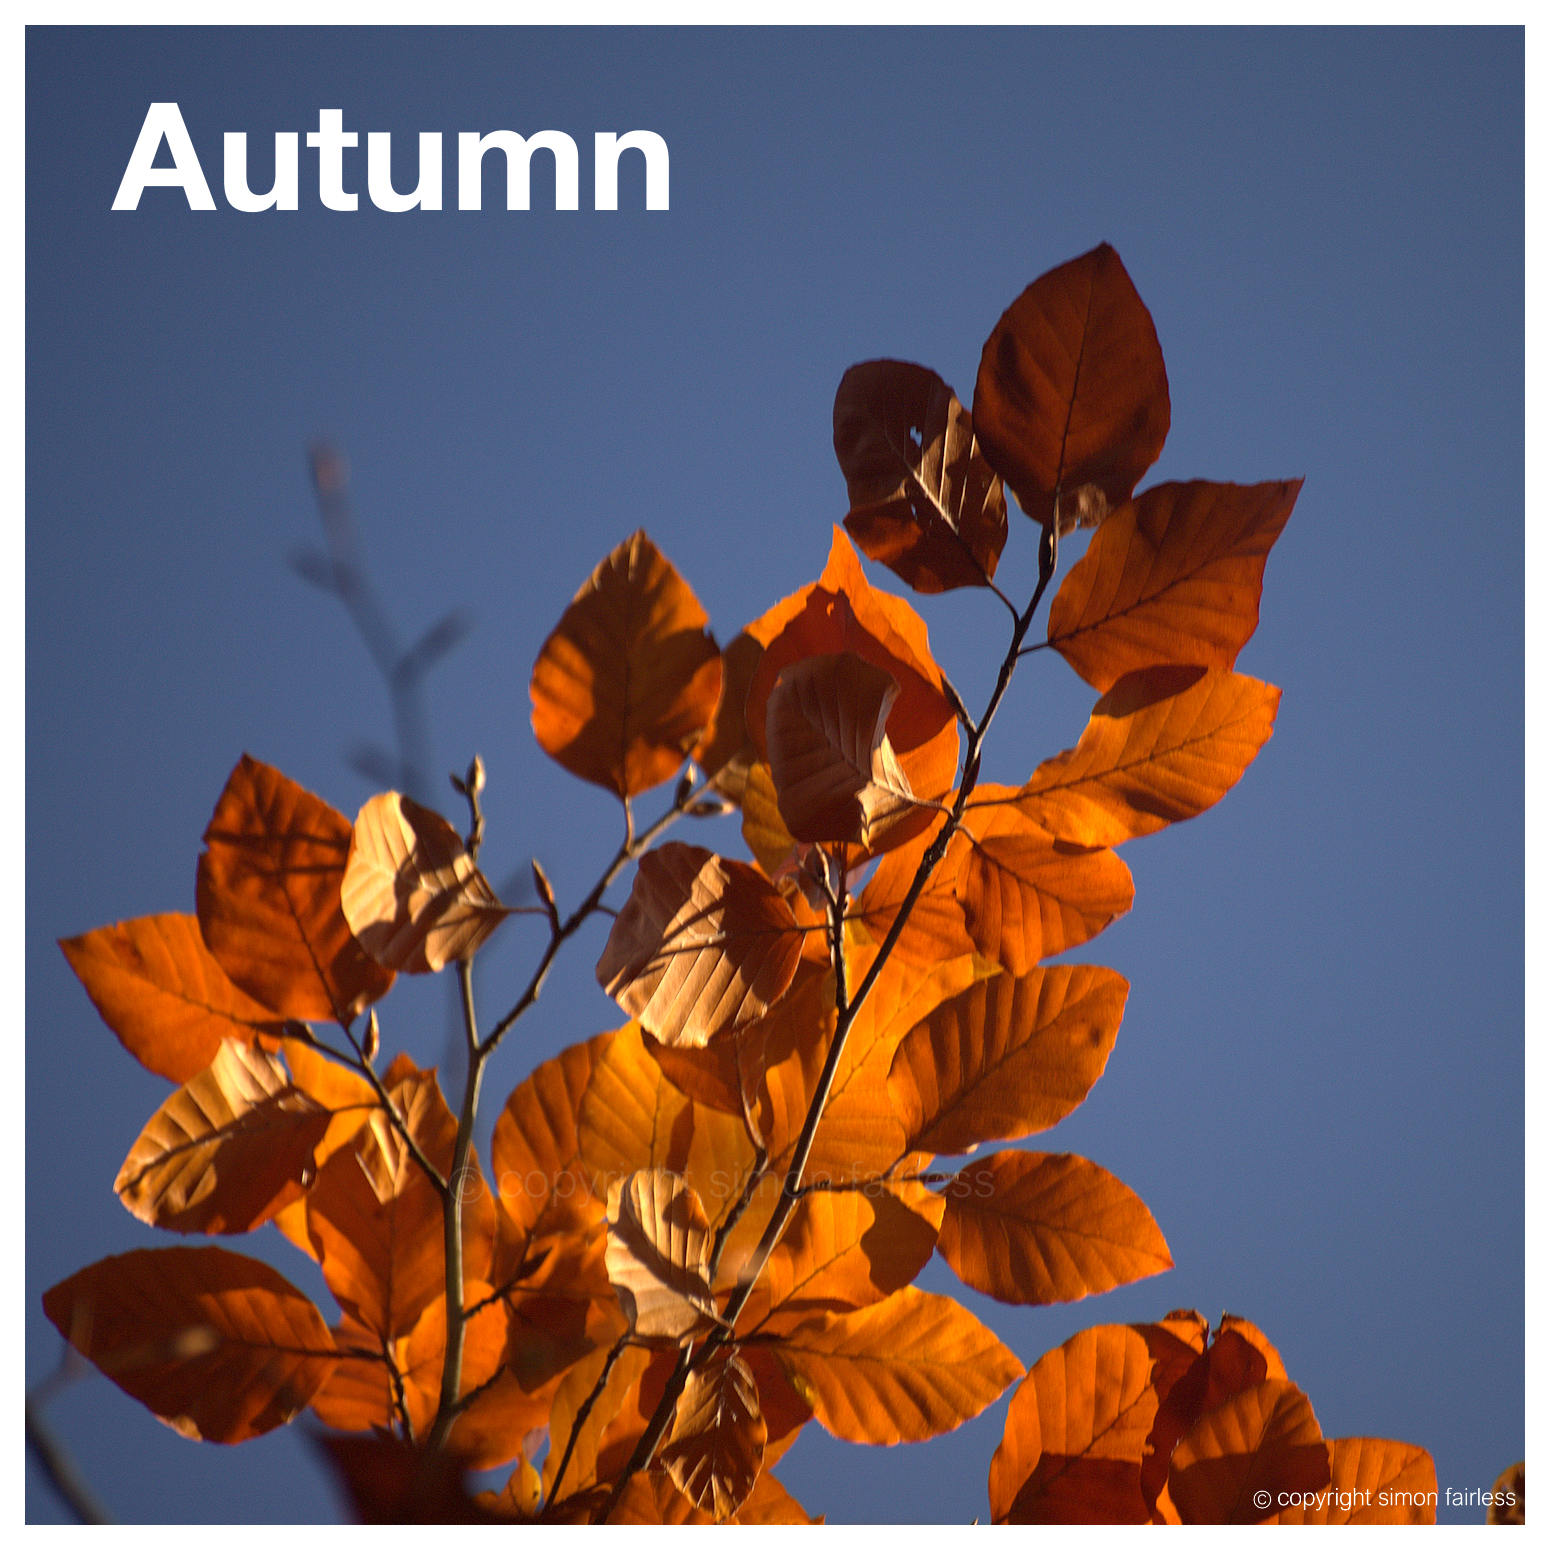 Autumn - Fall Image Gallery